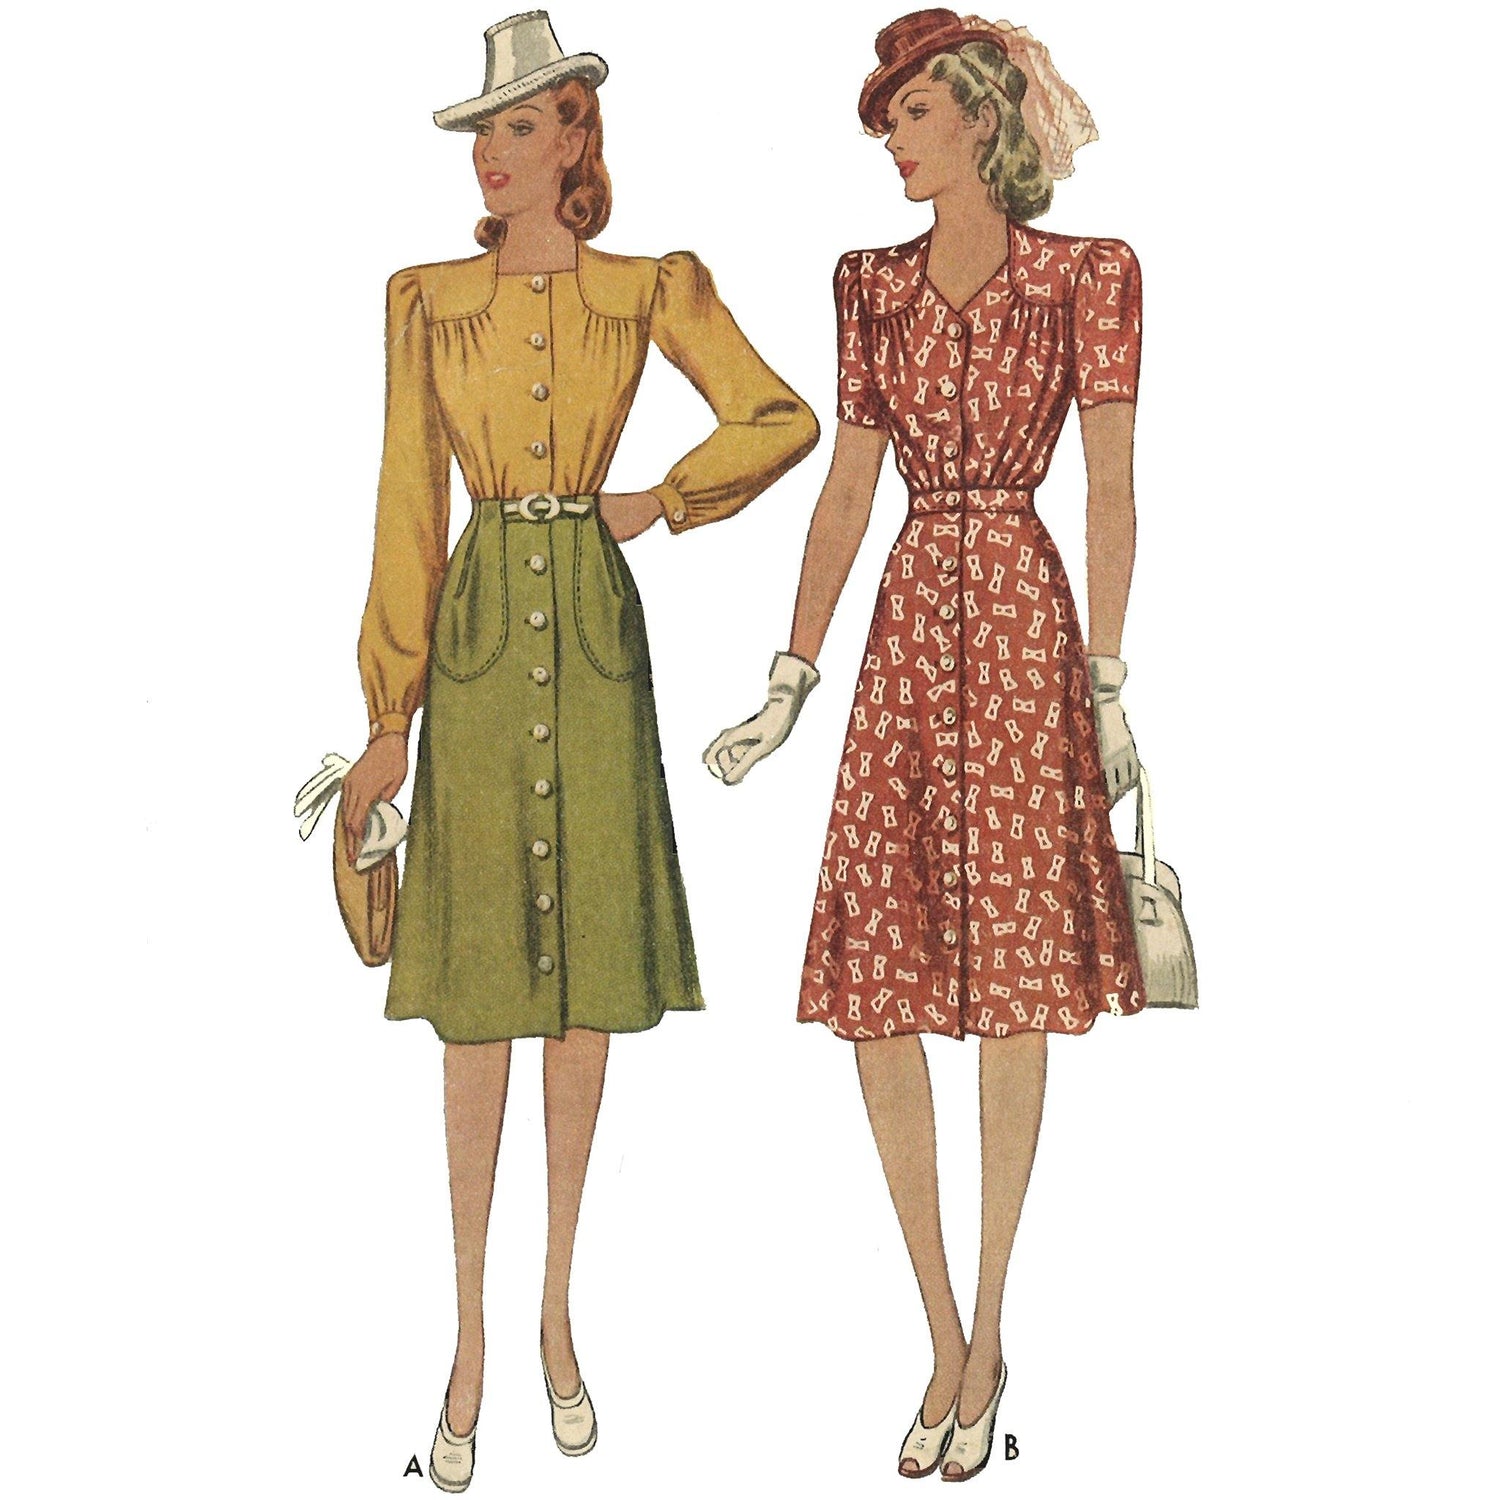 Two women wearing 1940s two piece dress. Left, 'View A', wearing yellow long sleeve shirt and green skirt with pockets. Right, 'View B', wearing short sleeve blouse and skirt both in red, with a white pattern.